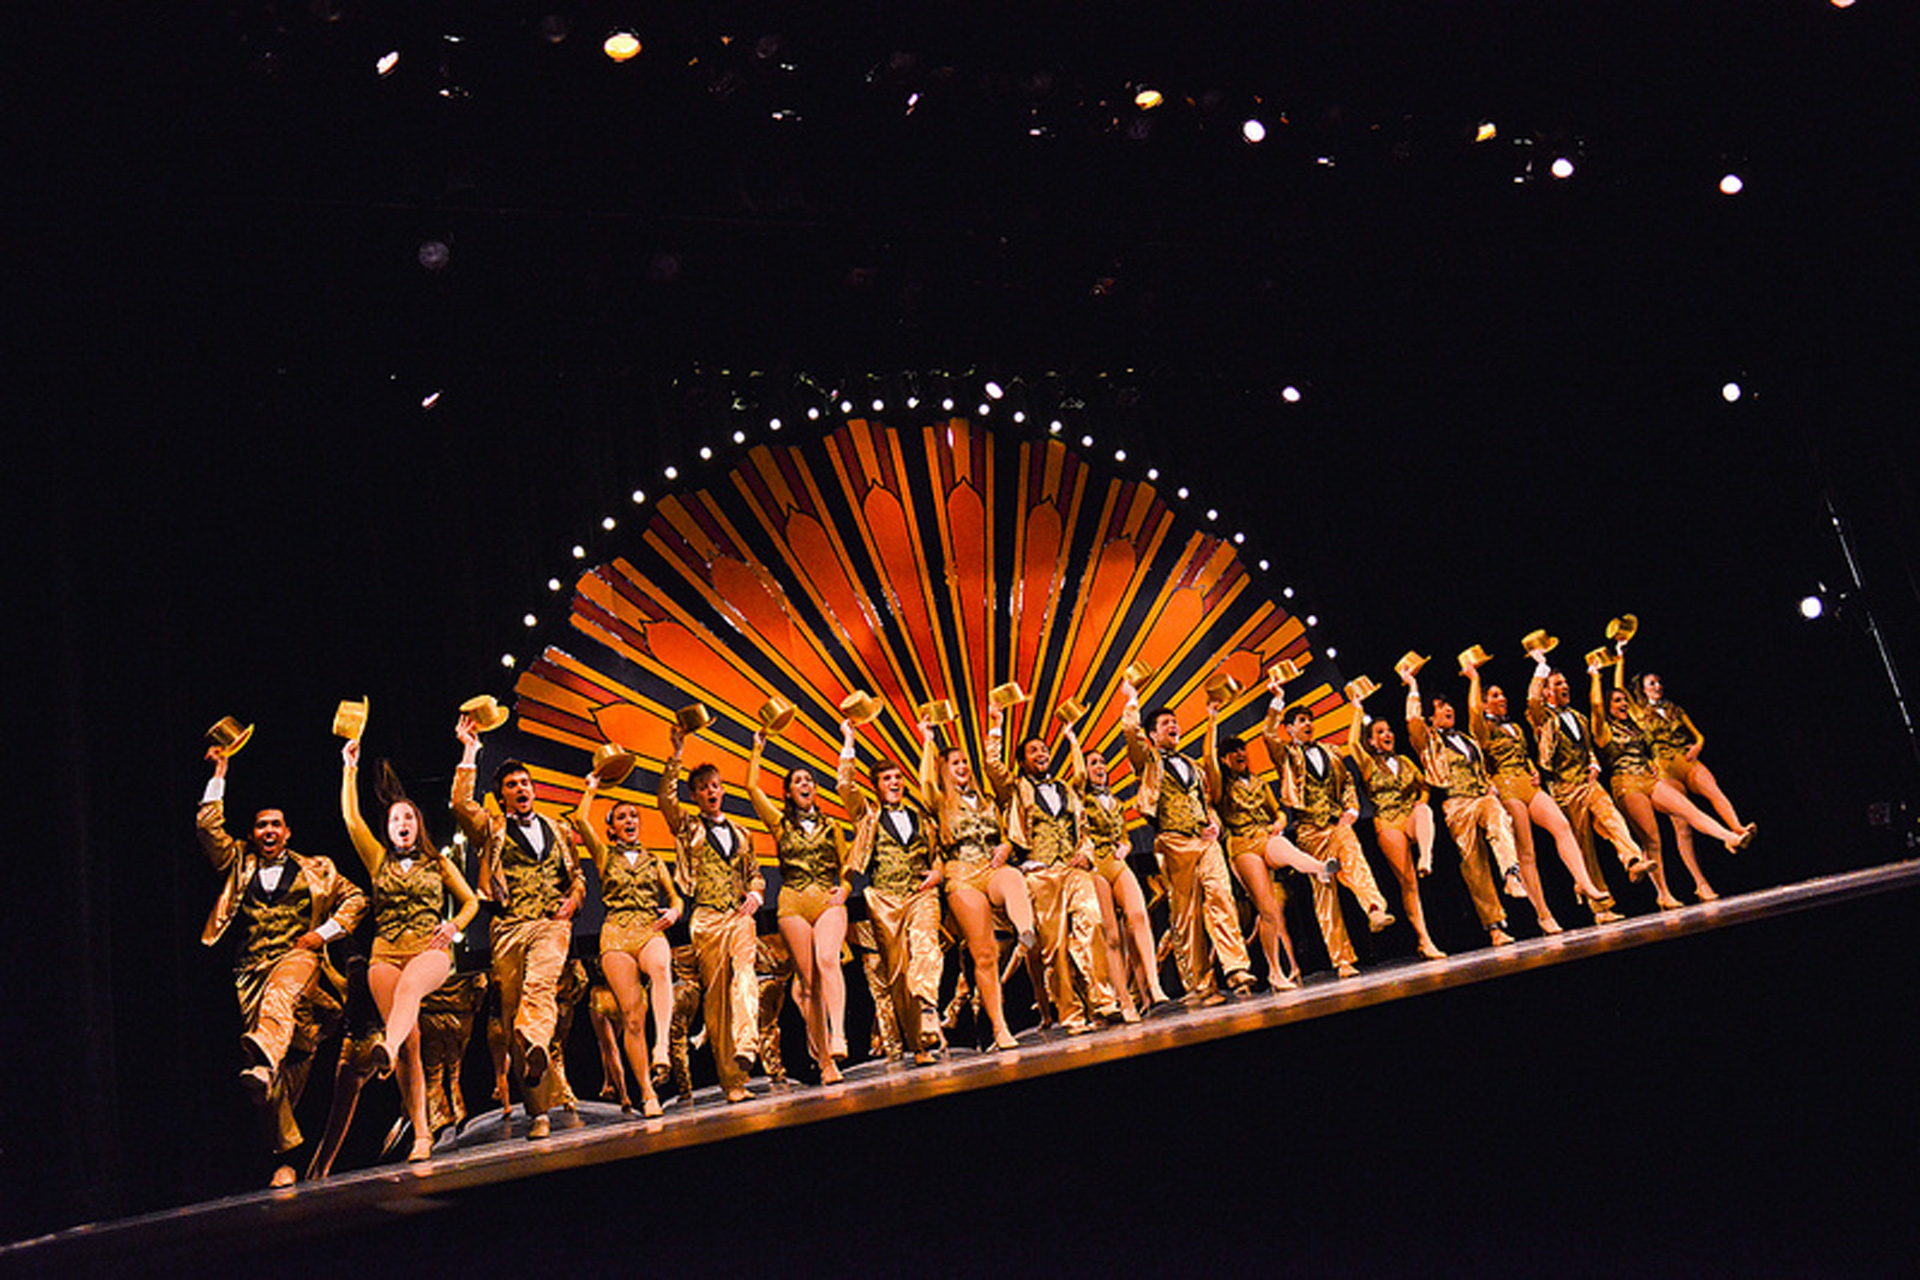 Actors and actresses line dancing with gold outfits and a starburst backdrop